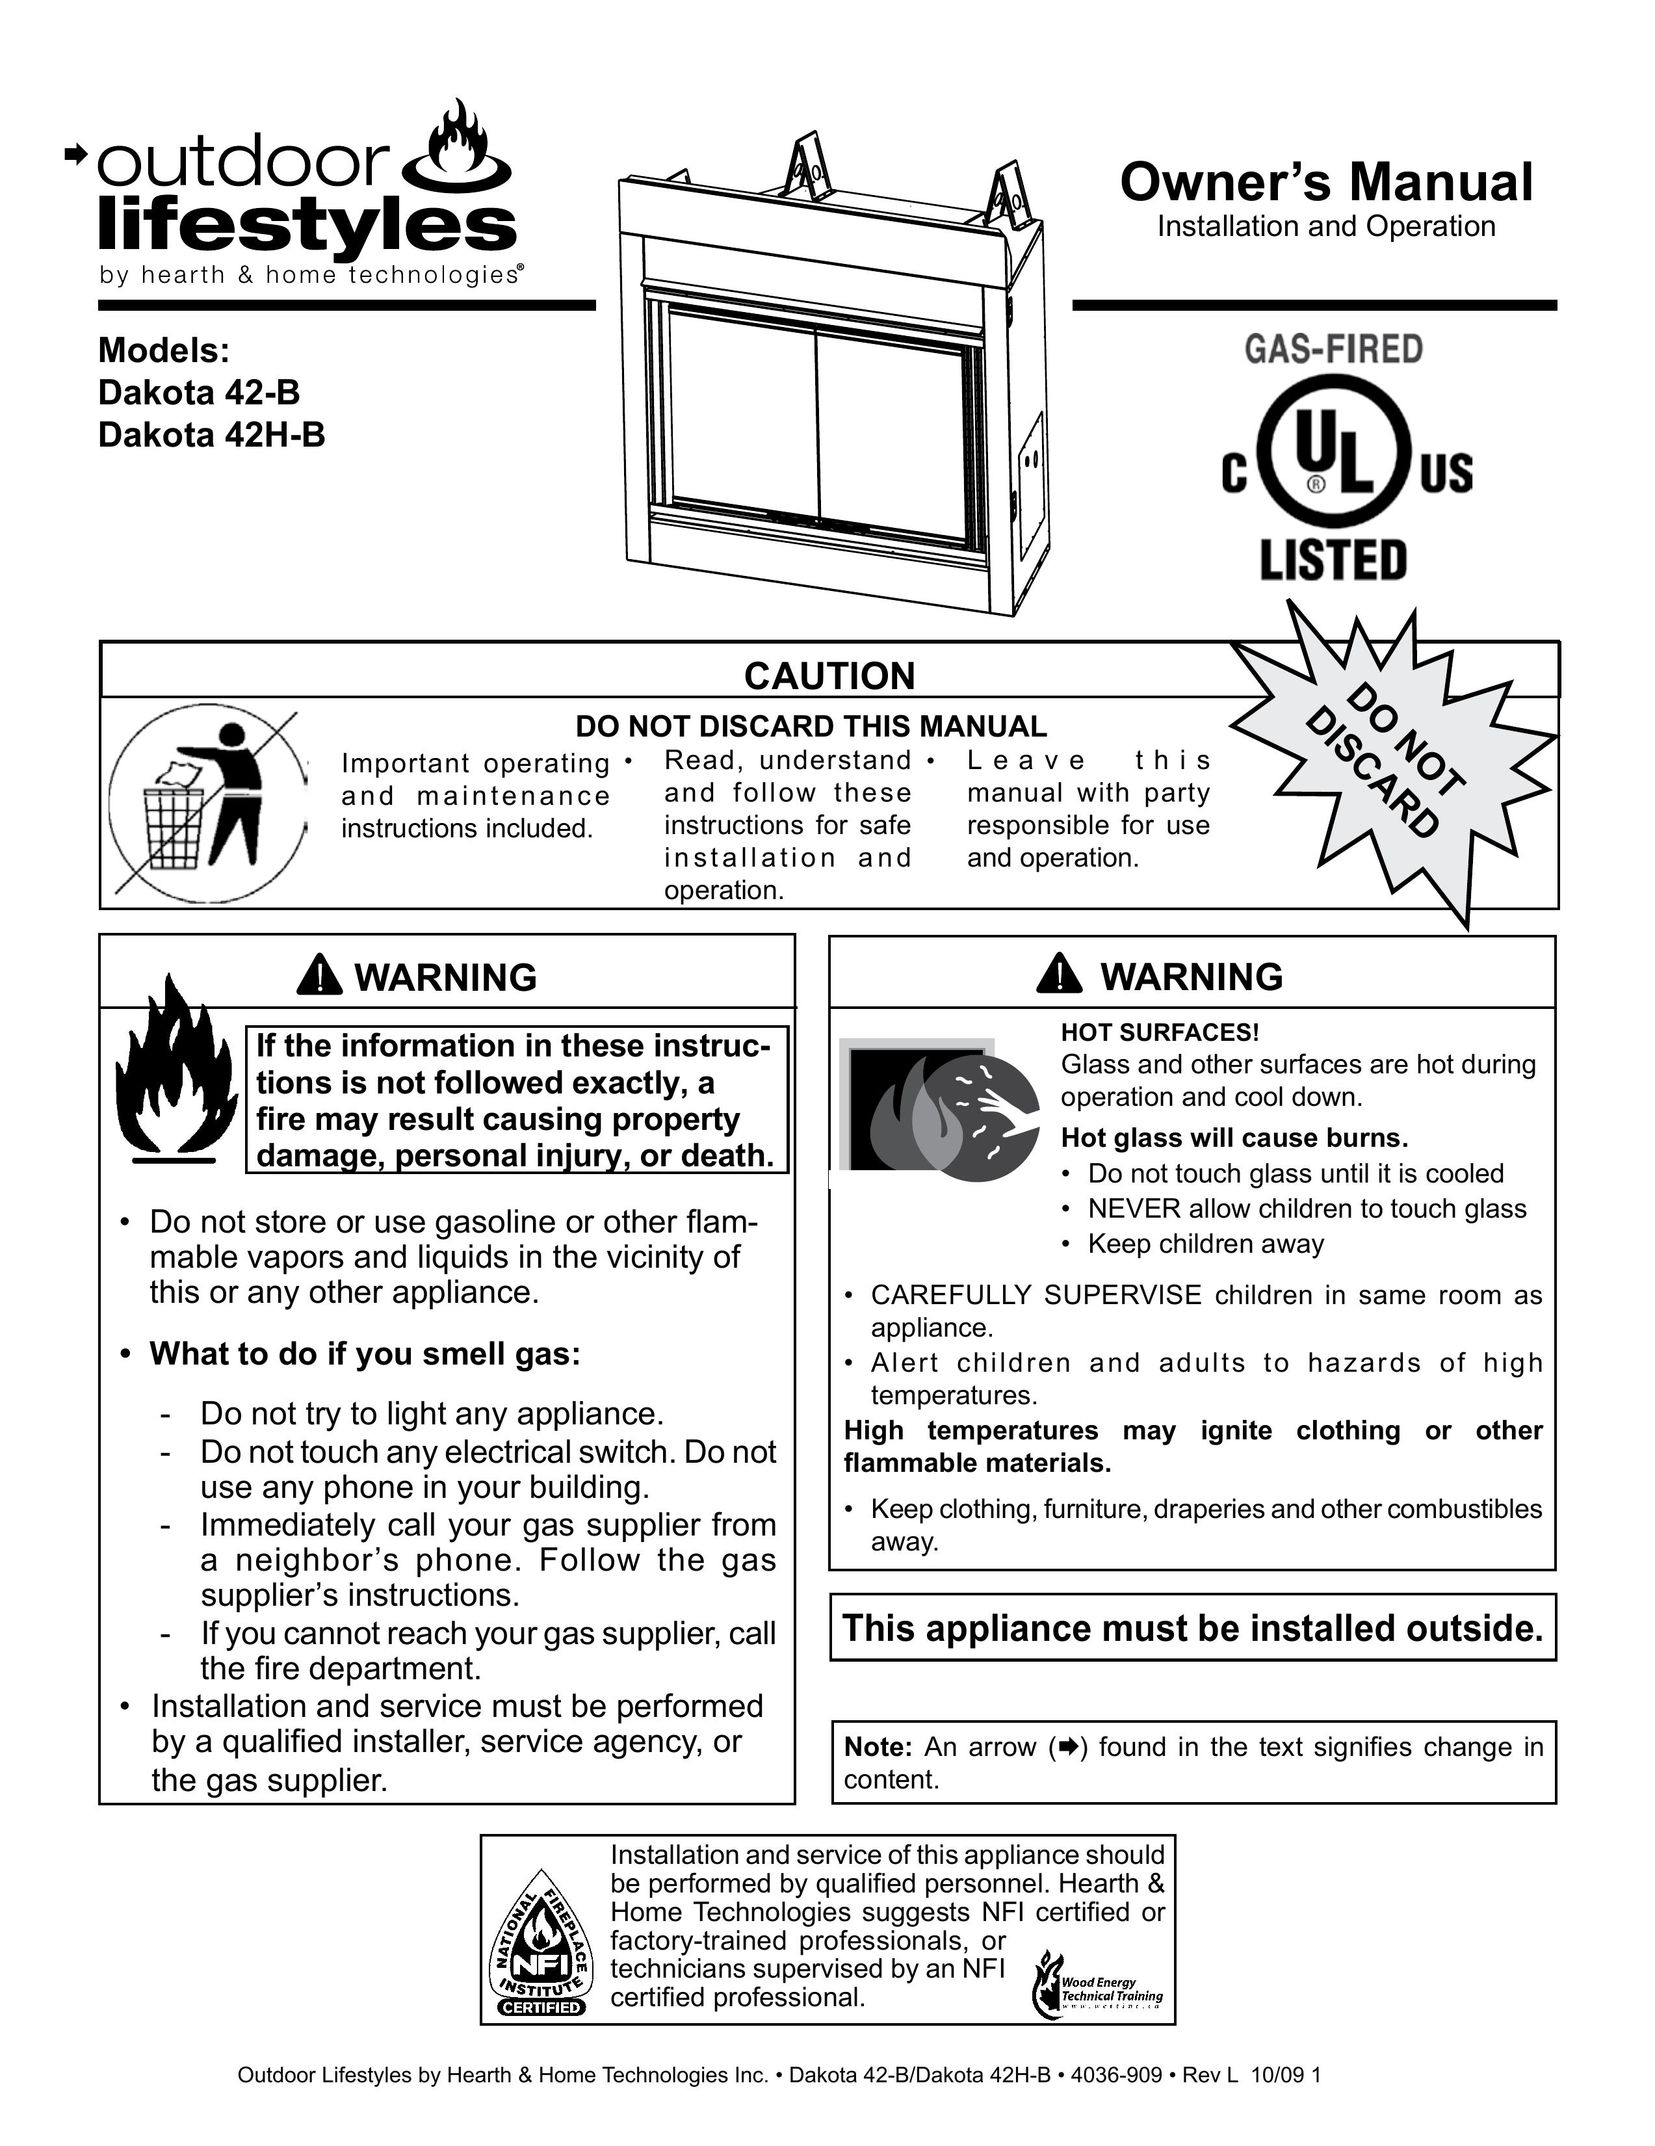 Hearth and Home Technologies 42-B Indoor Fireplace User Manual